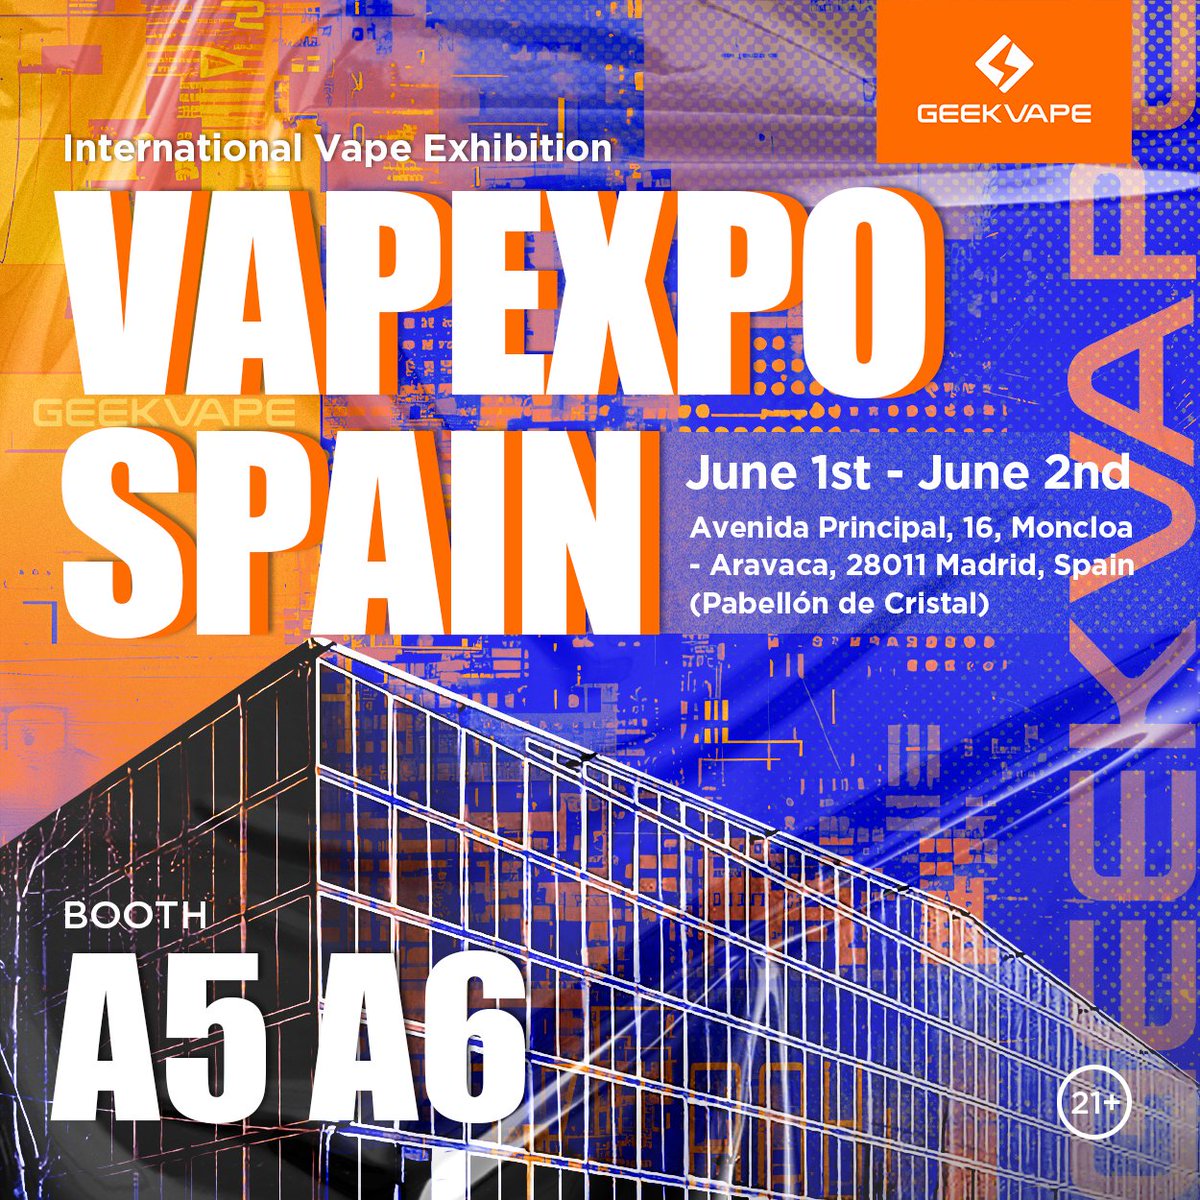 Get hyped for Vapexpo Spain! Swing by Booth A5&A6 for the ultimate vaping experience. Surprises await! 📍 Avenida Principal, 16, Moncloa-Aravaca, 28011 Madrid, Spain (Pabellón de Cristal) 🗓️ June 1st - June 2nd, 2024 Who's ready for some vape magic? 💨✨ #geekvape #vapexpo